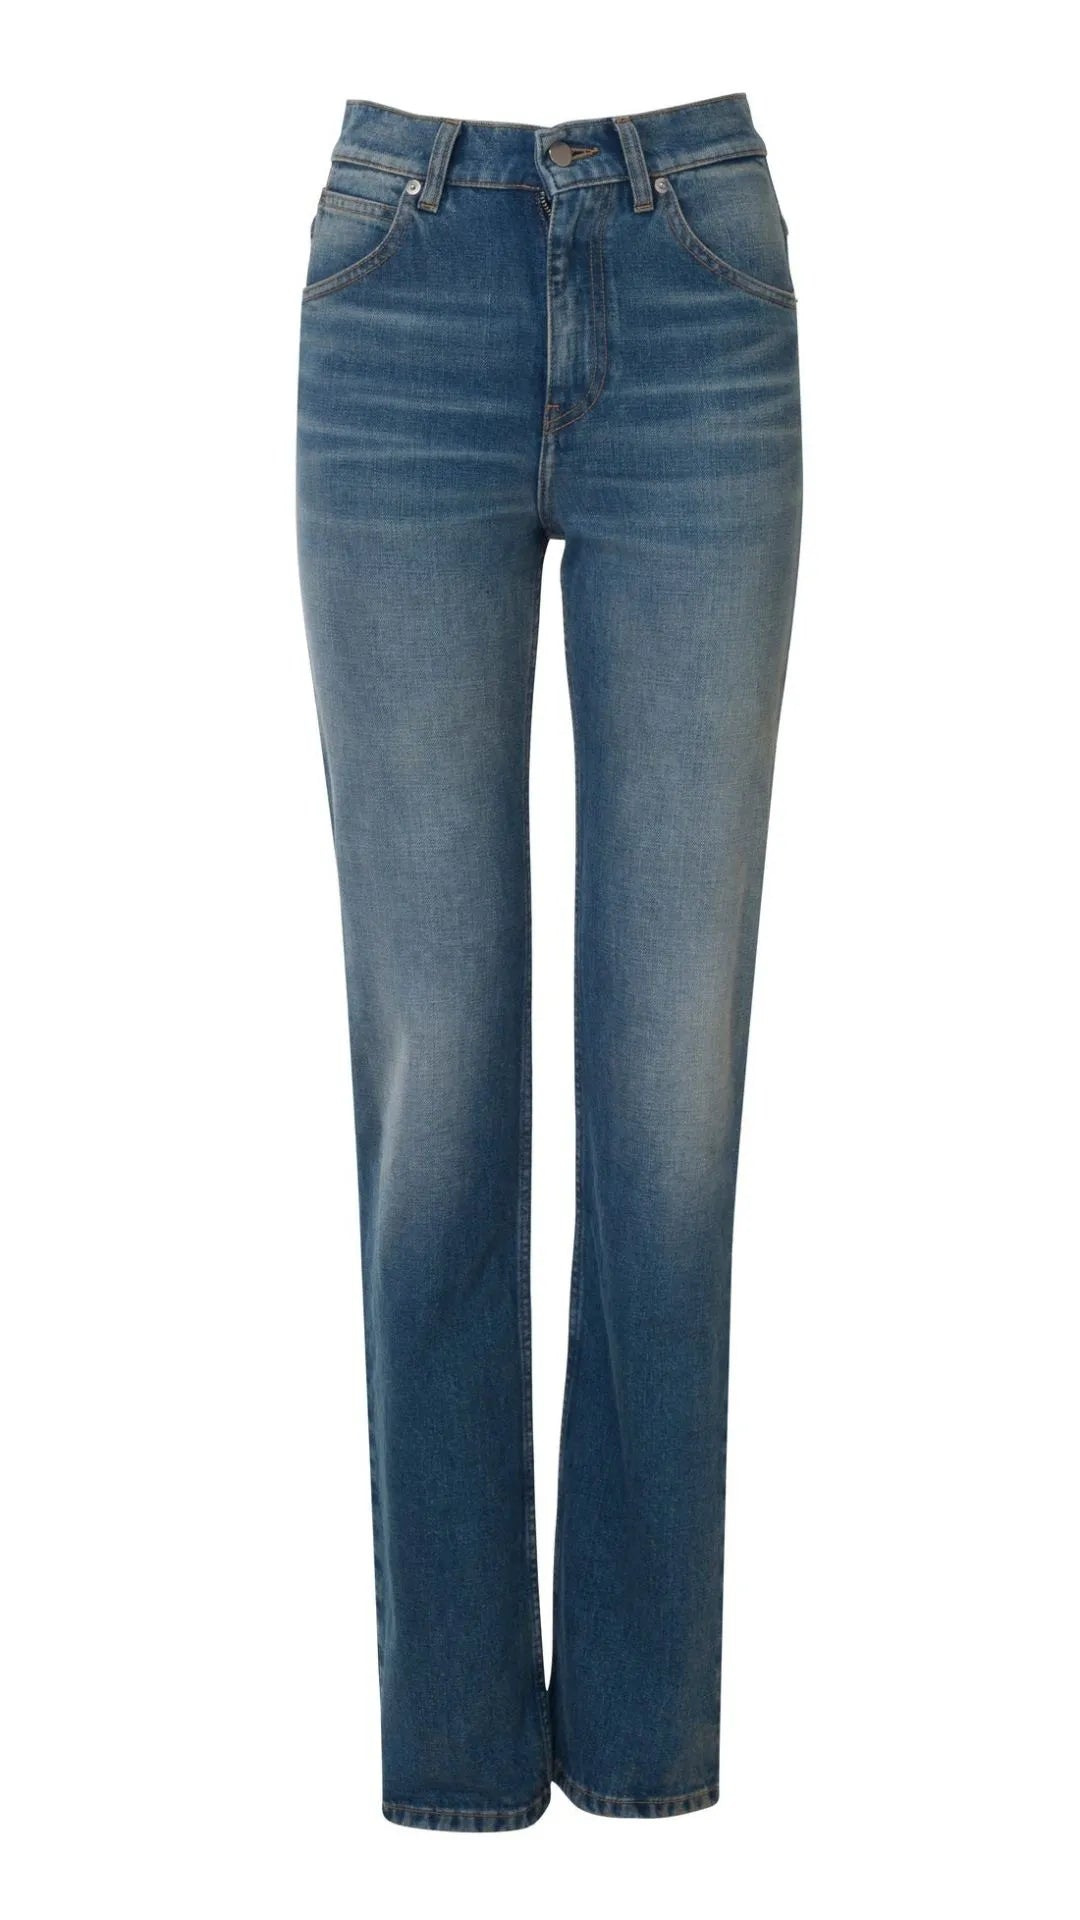 Dodo Bar Or Jett Jean. A high waist, slimming and elongating legs style denim pant. Product photo shown from the front.